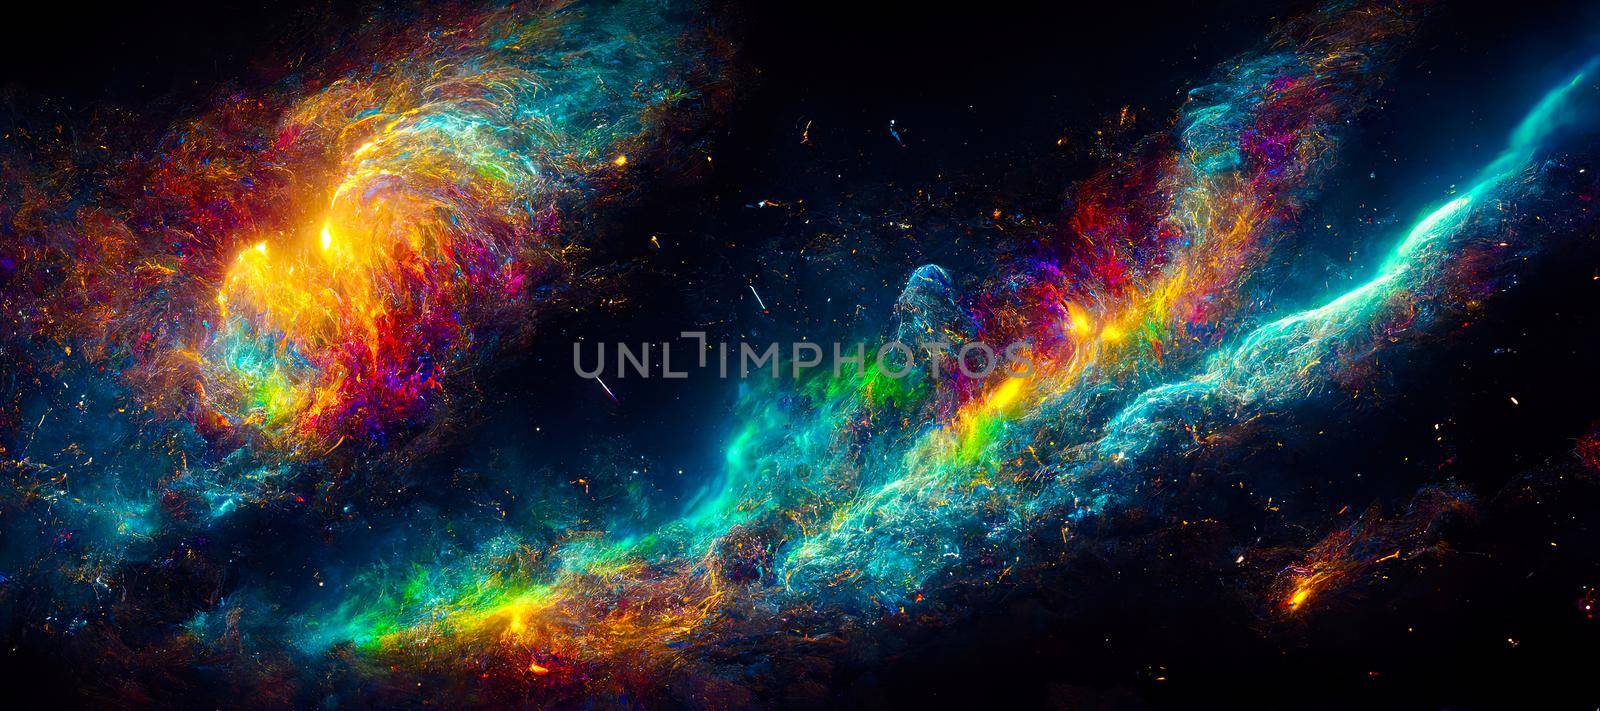 abstract space landscape of the universe with stars and nebulae by TRMK